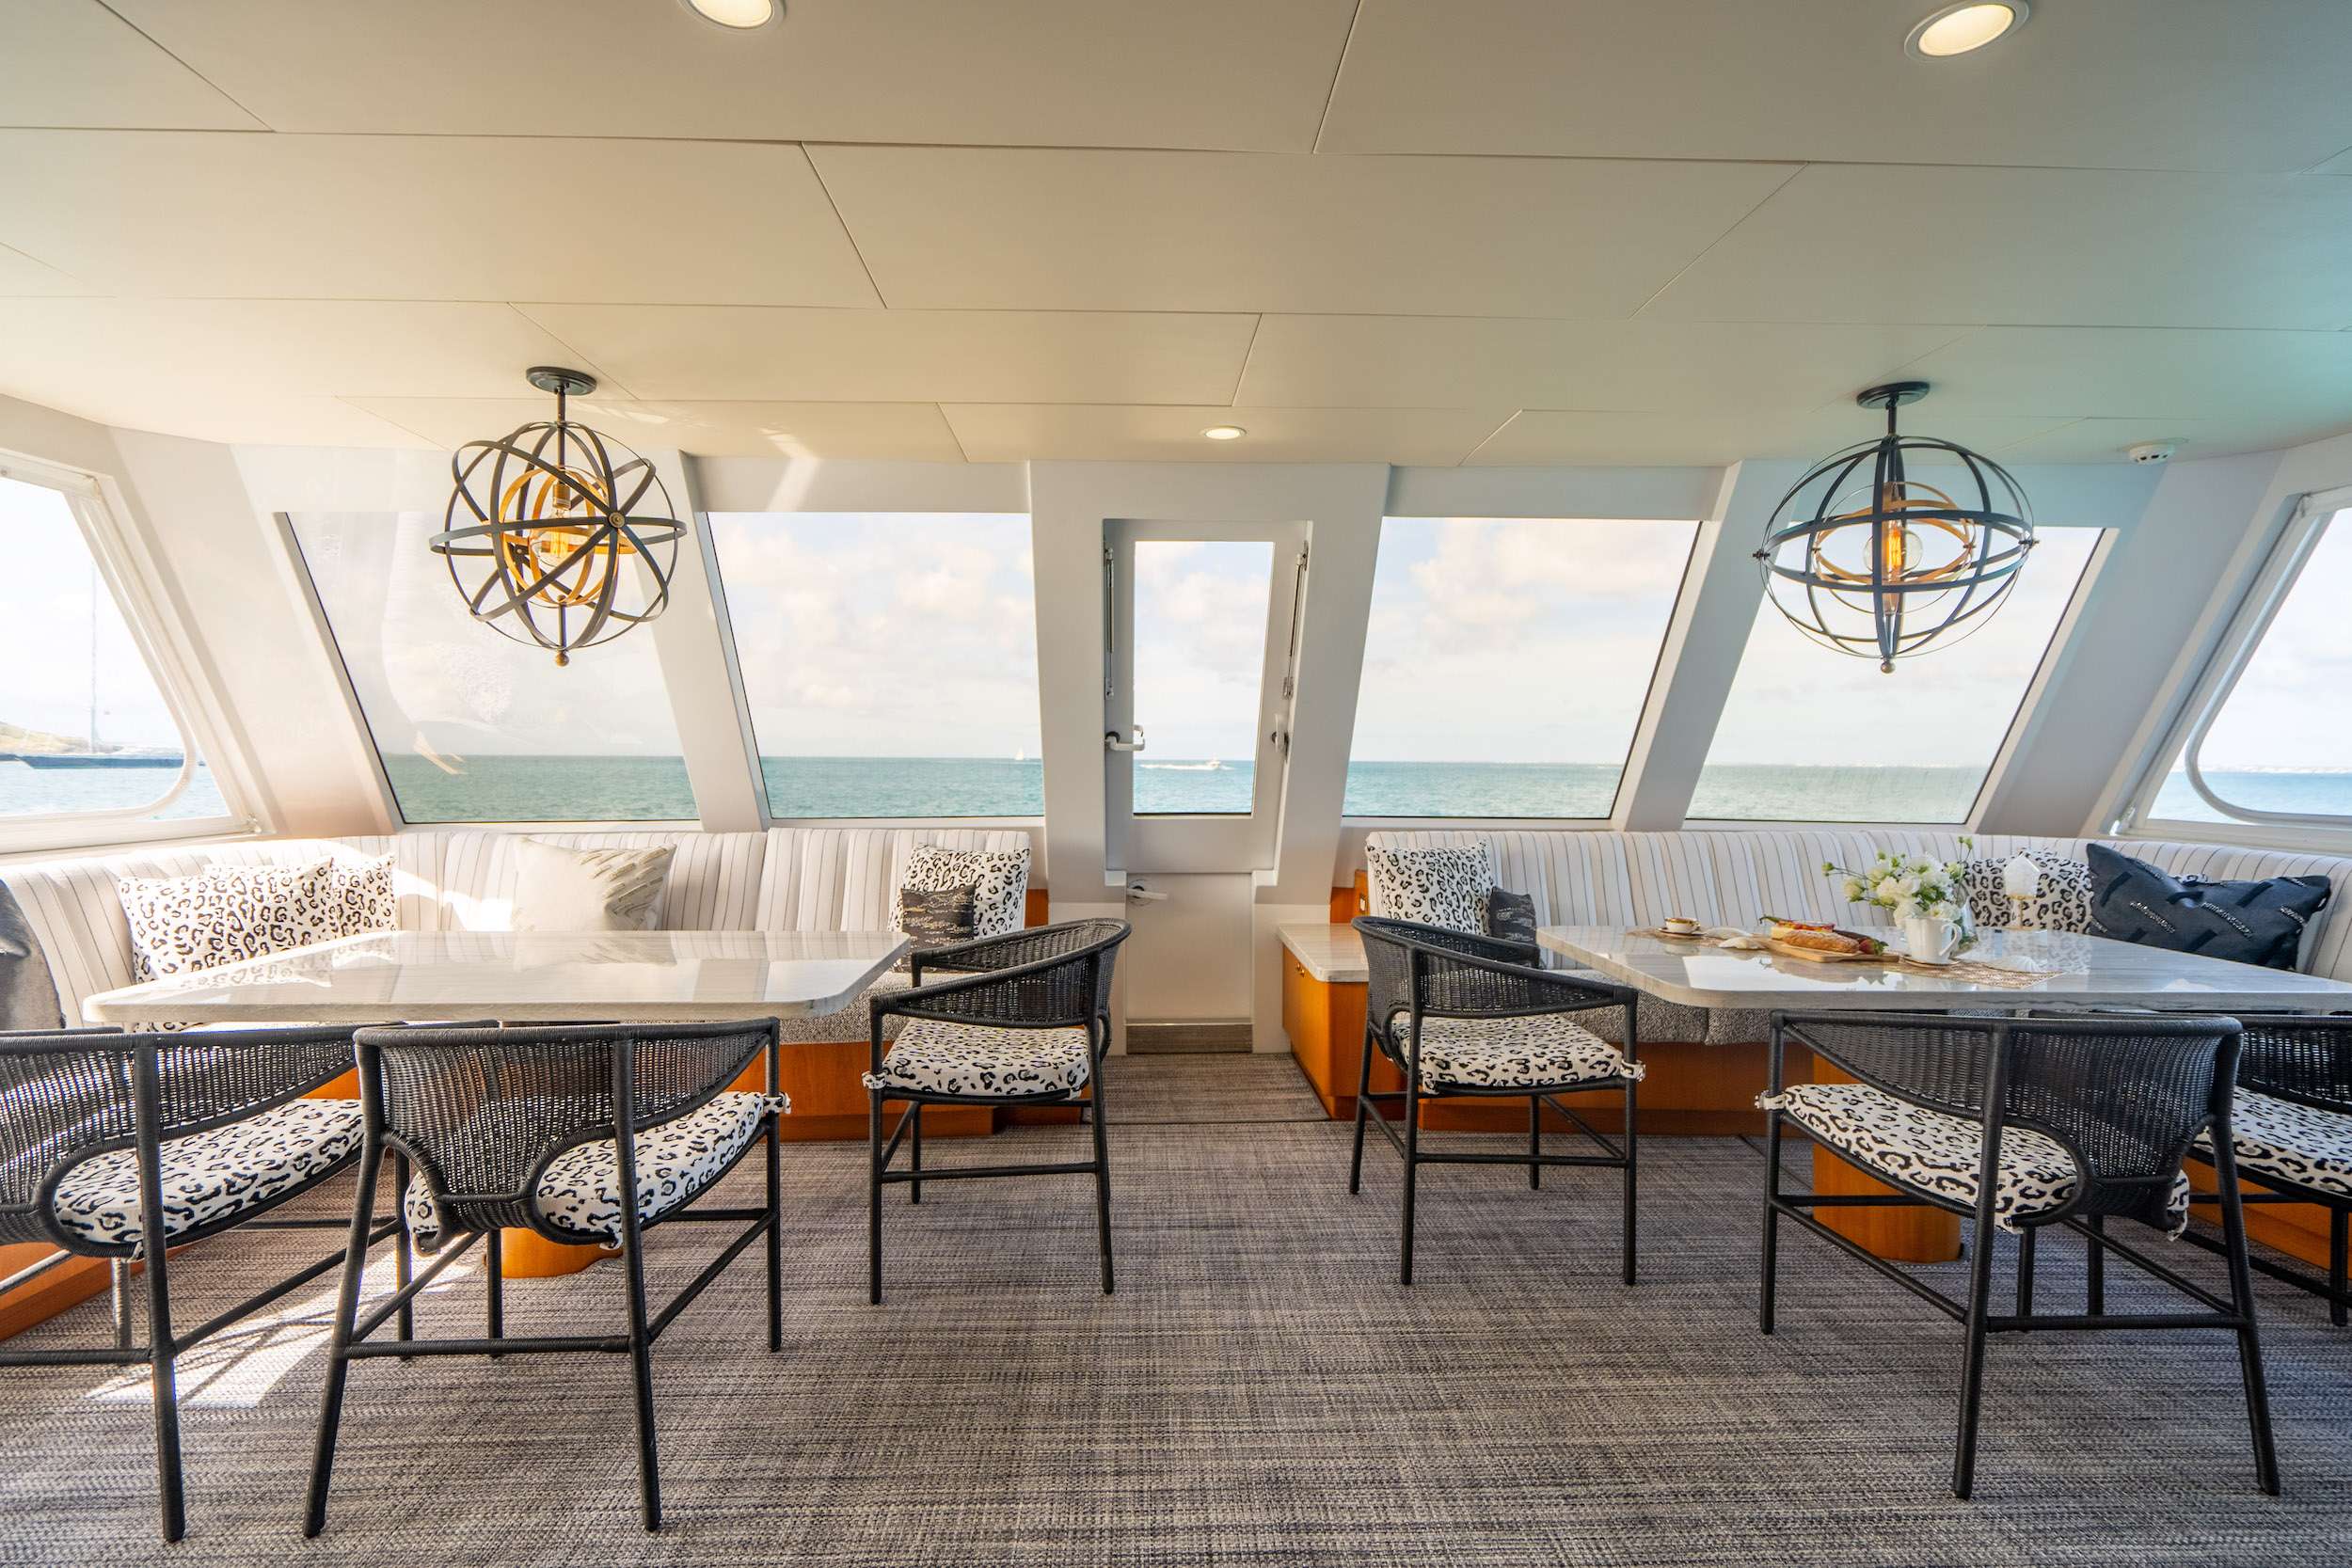 GALE WINDS Yacht Charter - Main Aft Deck Lounge